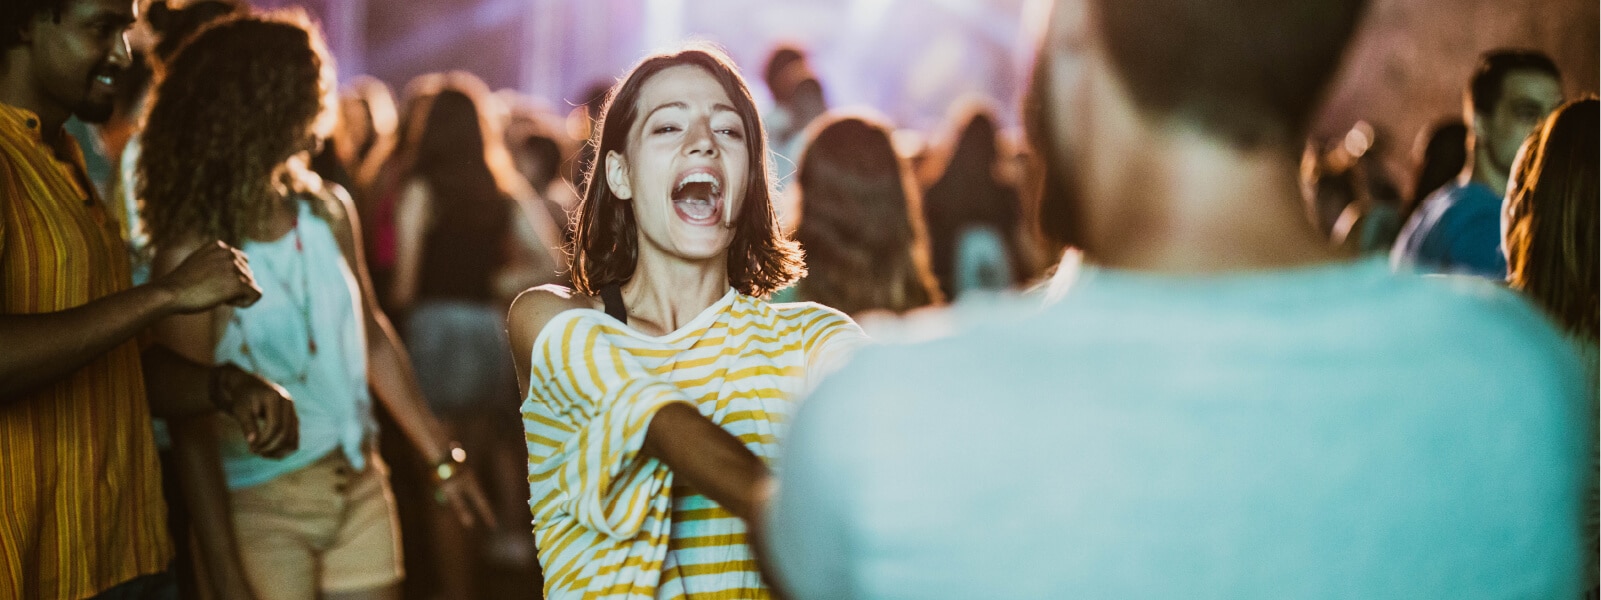 People at a Ticketmaster event having fun in a crowd, most likely a concert.